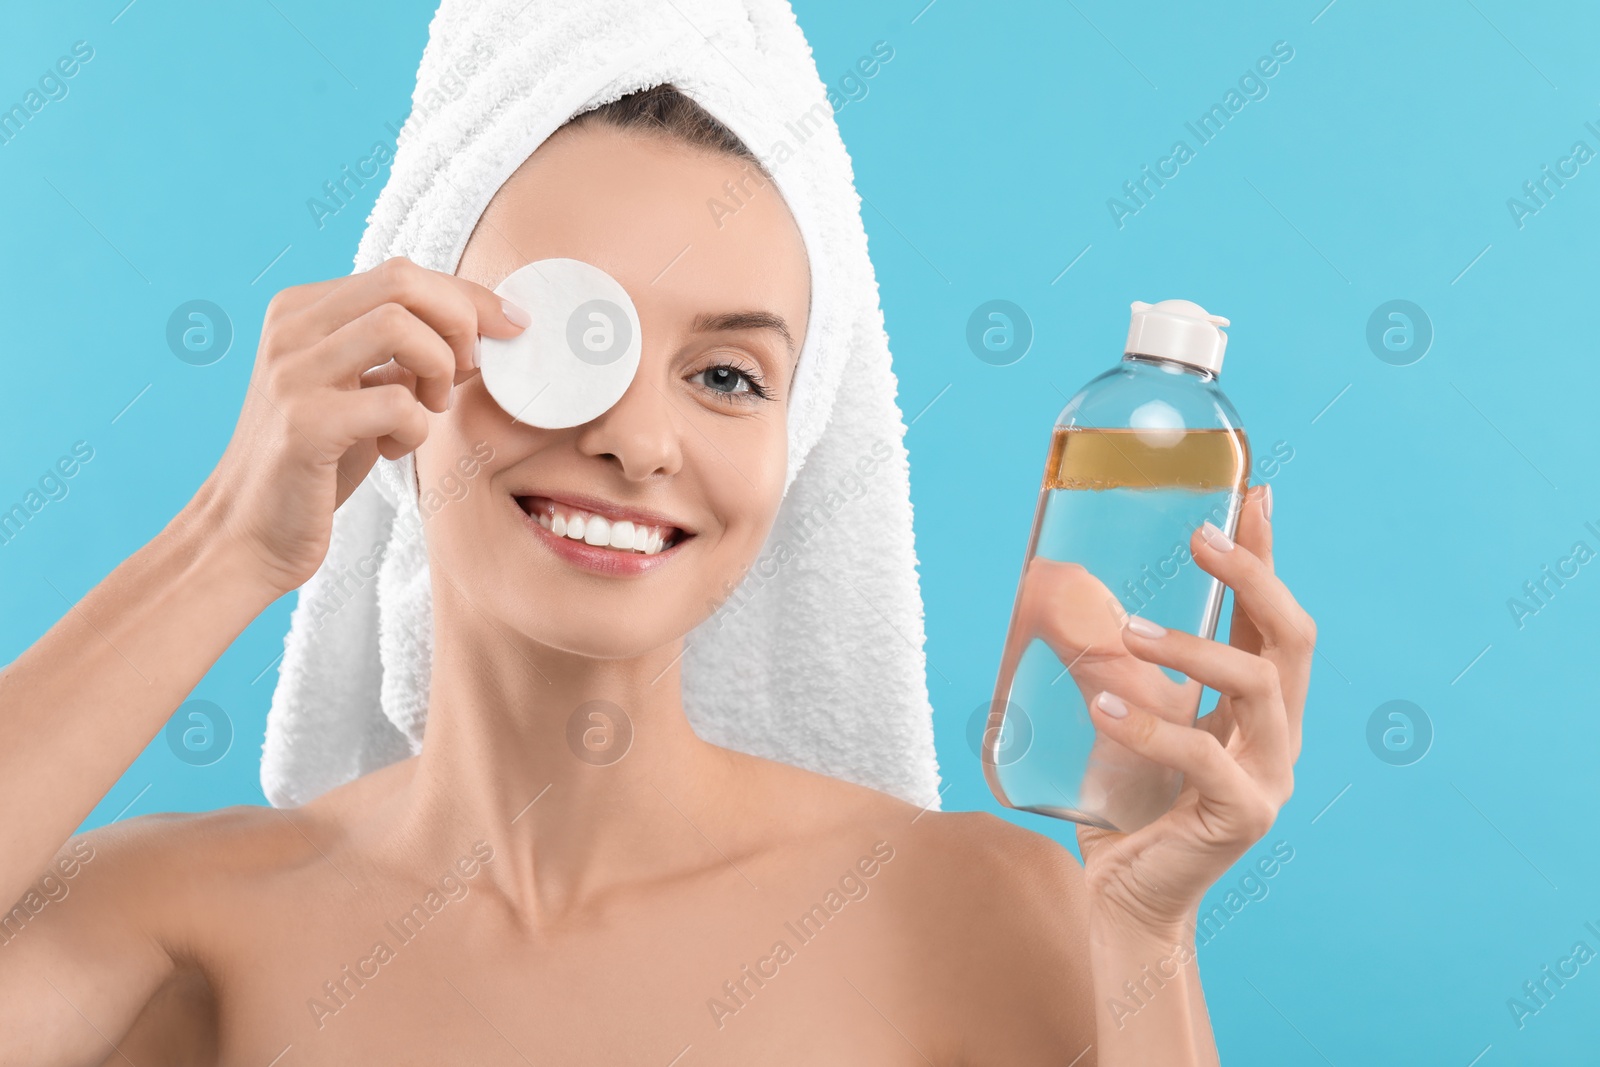 Photo of Smiling woman removing makeup with cotton pad and holding bottle on light blue background